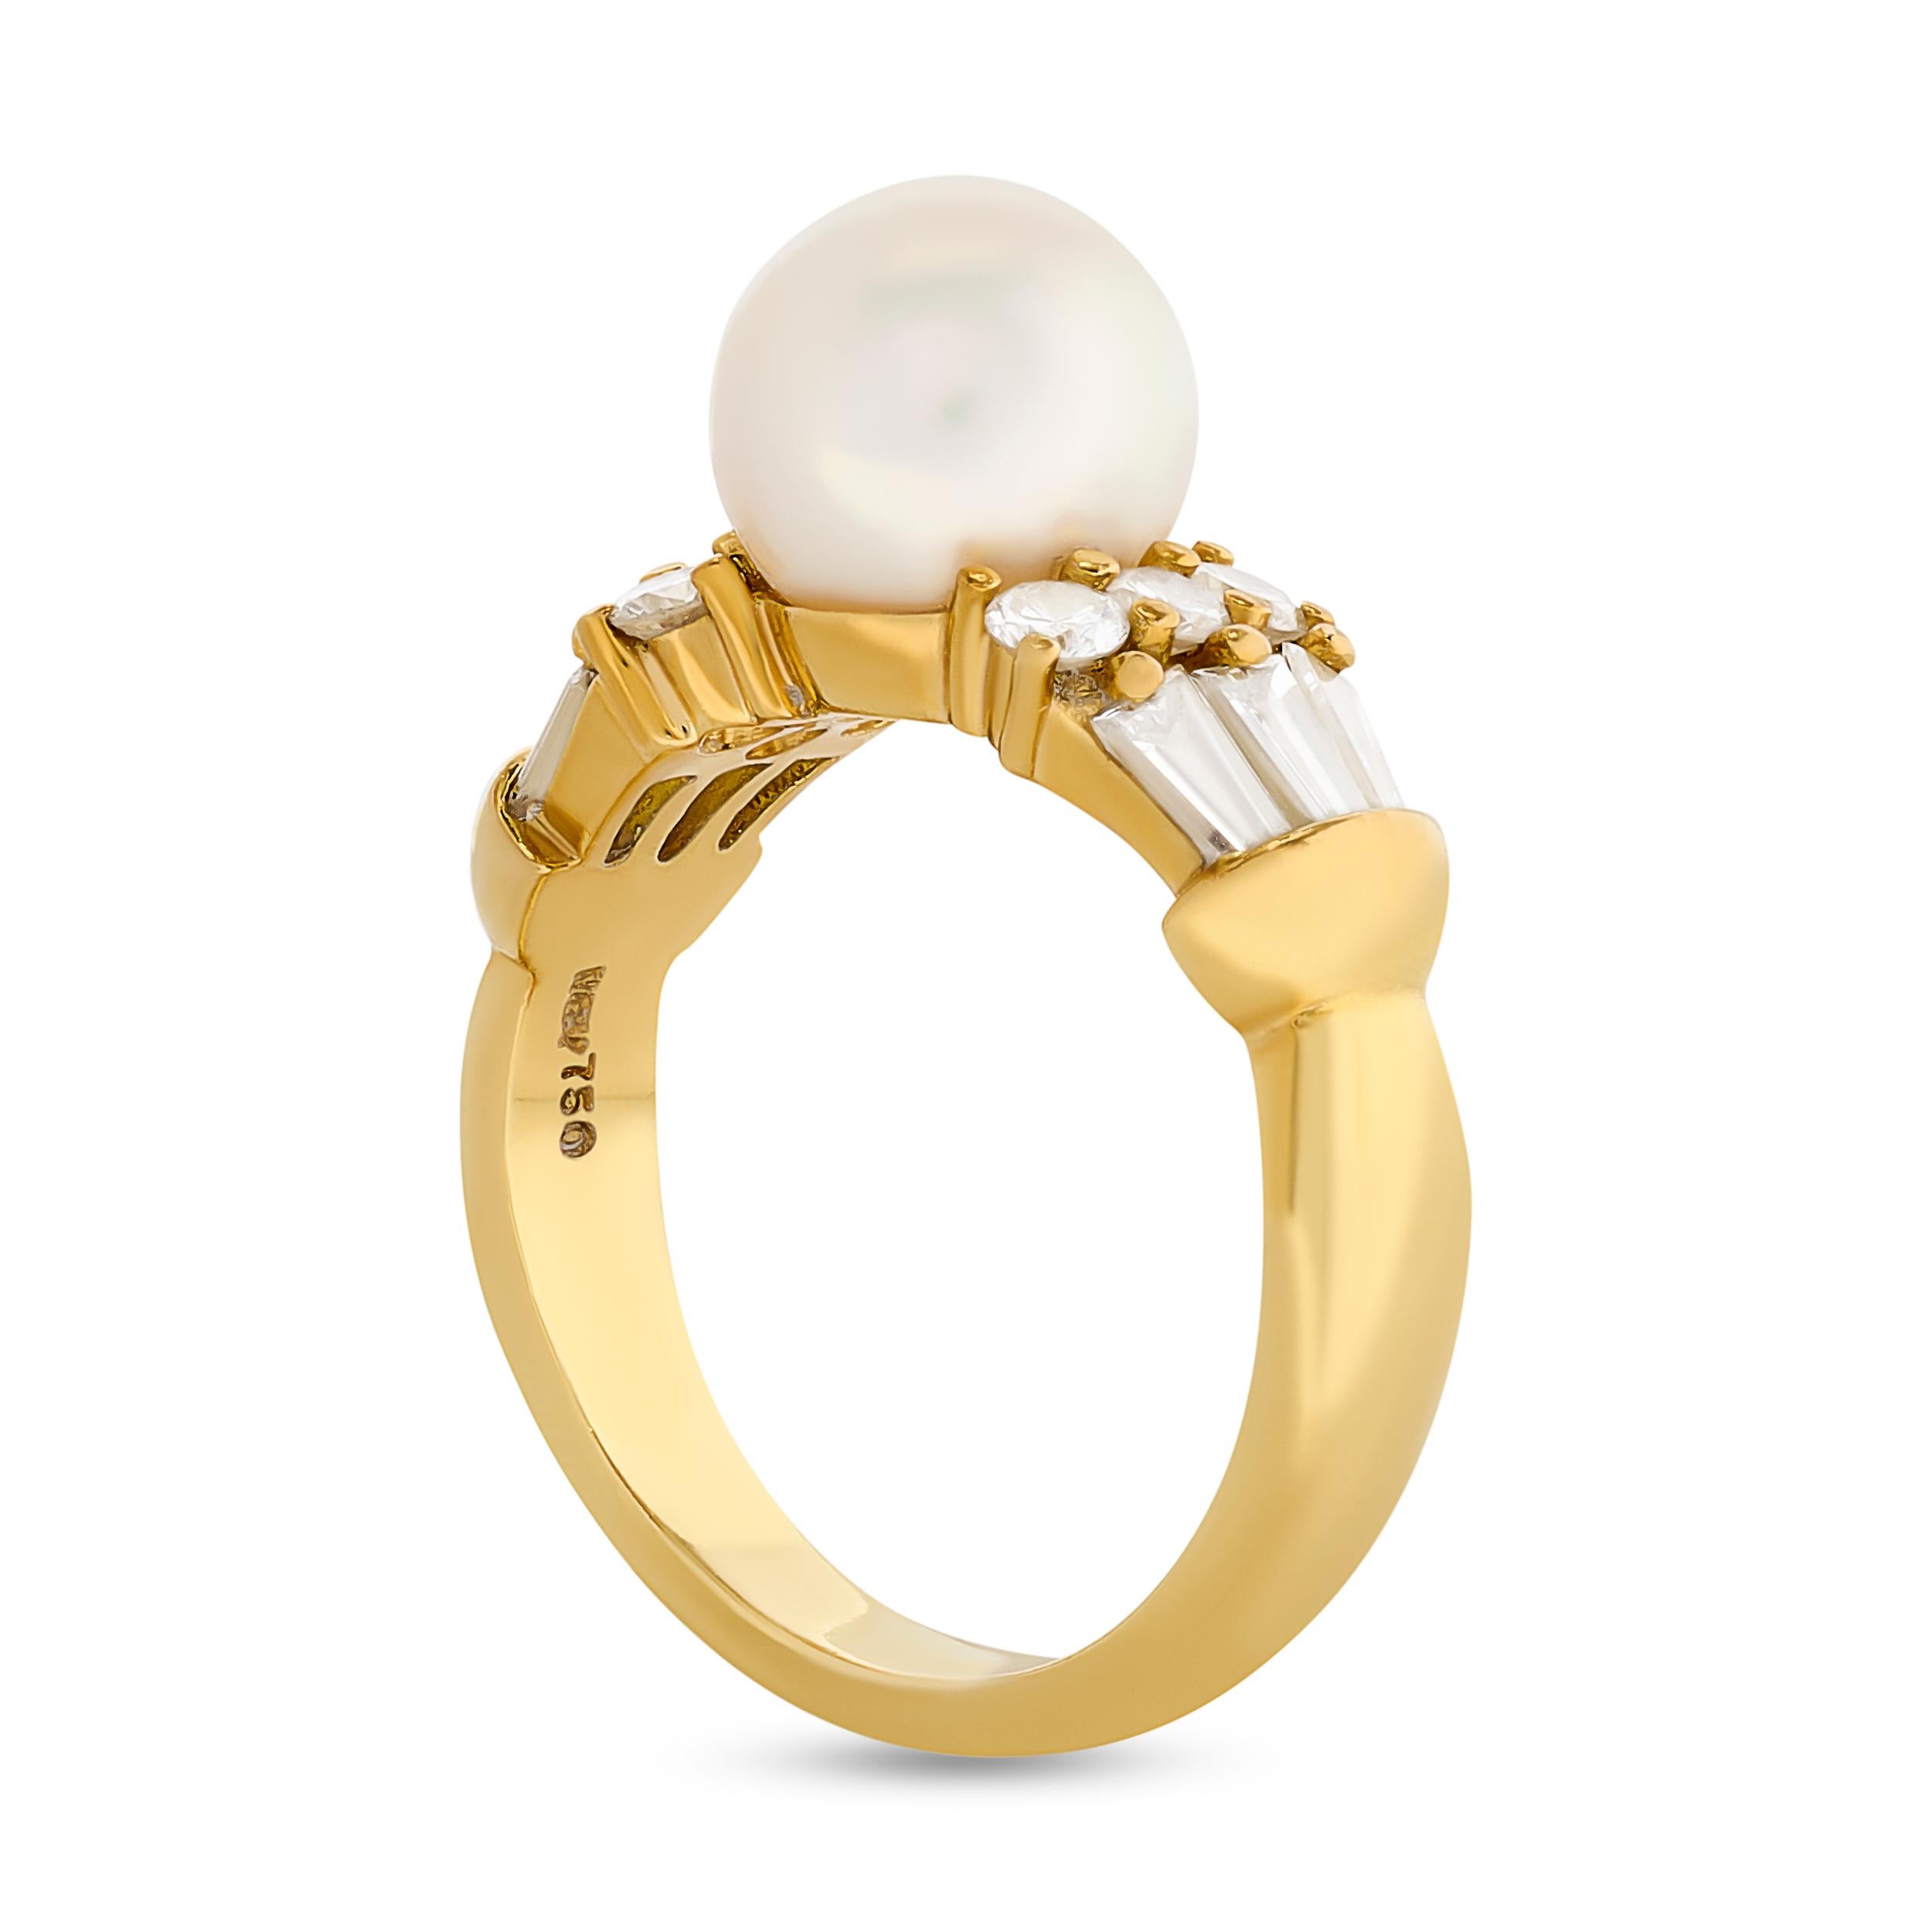 A Mikimoto pearl and diamond ring - a stunning blend of a lustrous pearl, brilliant diamonds, and gleaming yellow gold. 
There are 6 round and 6 baguette diamonds that in total, weigh approximately 0.80 carats; color H-I and clarity SI. 

Ring size